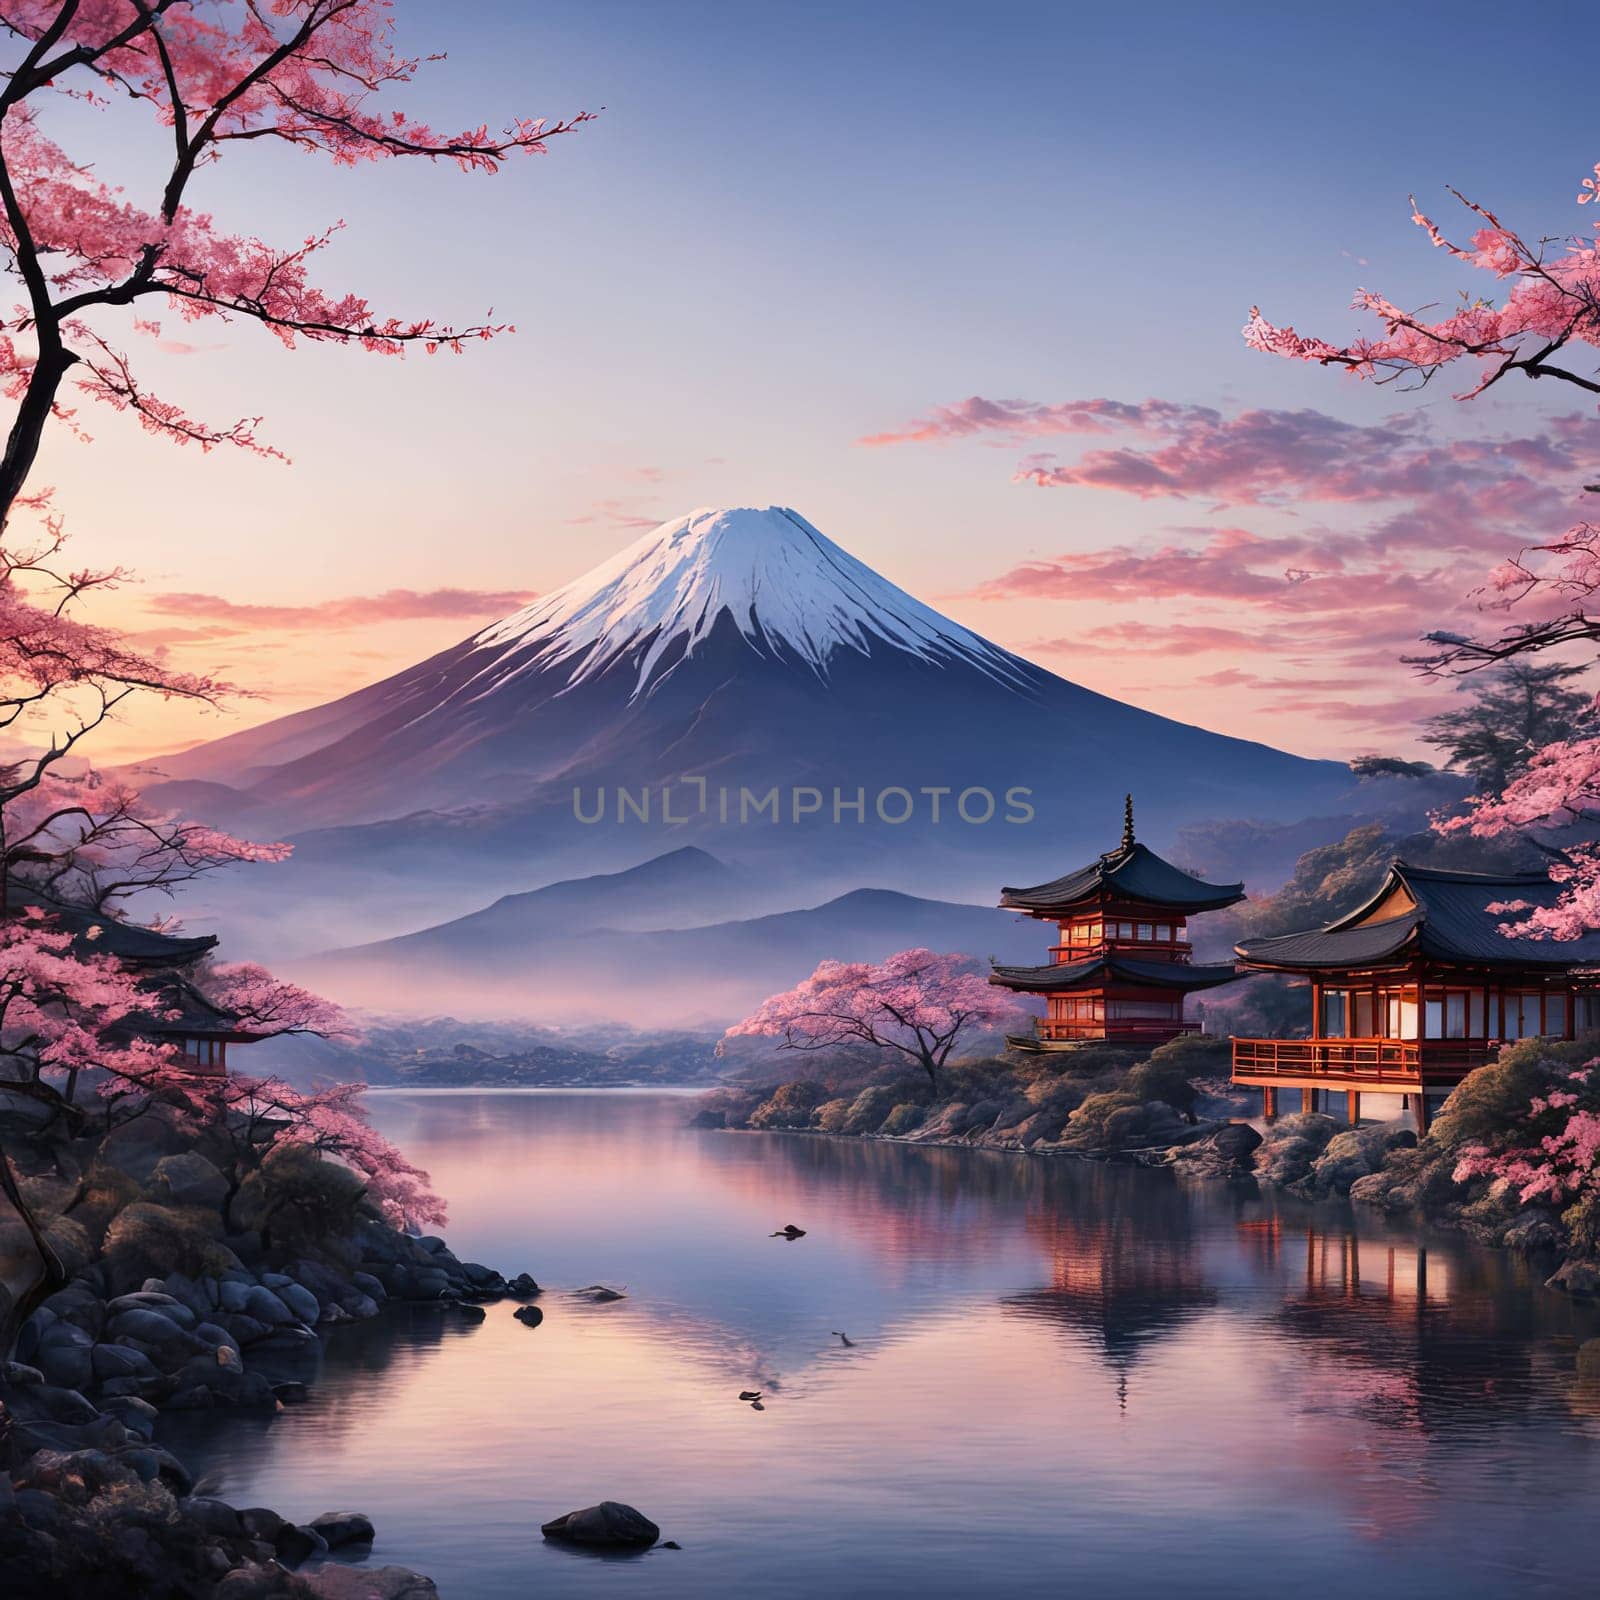 Japanese pagoda gracefully reflected on tranquil surface of lake, surrounded by lush greenery, embodying sense of peace, harmony. For interior, commercial spaces to create stylish atmosphere, print